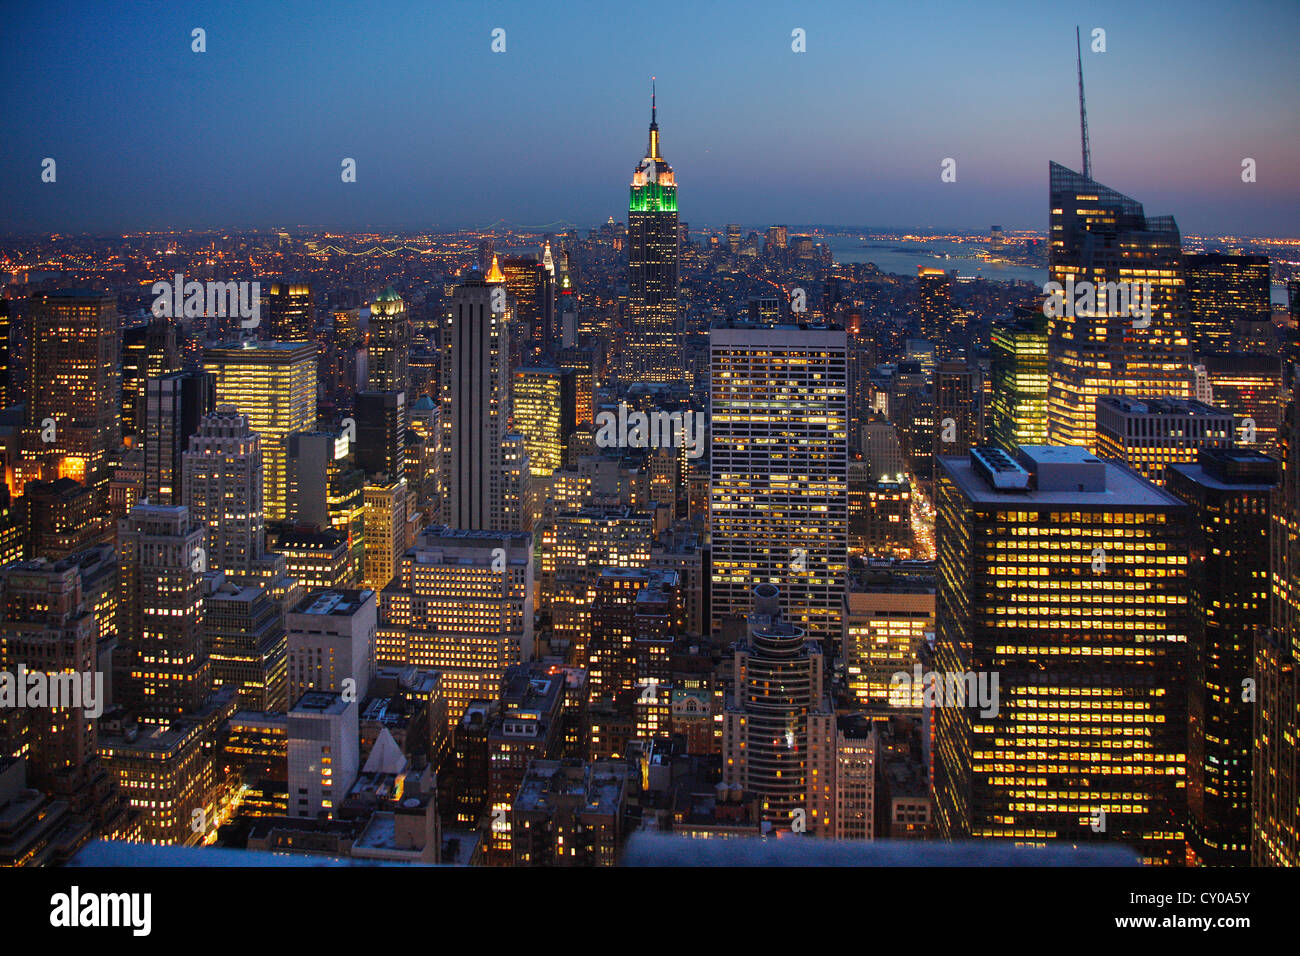 View from the Rockefeller Center over the Big Apple at dusk, Empire State Building, New York City, New York, United States Stock Photo